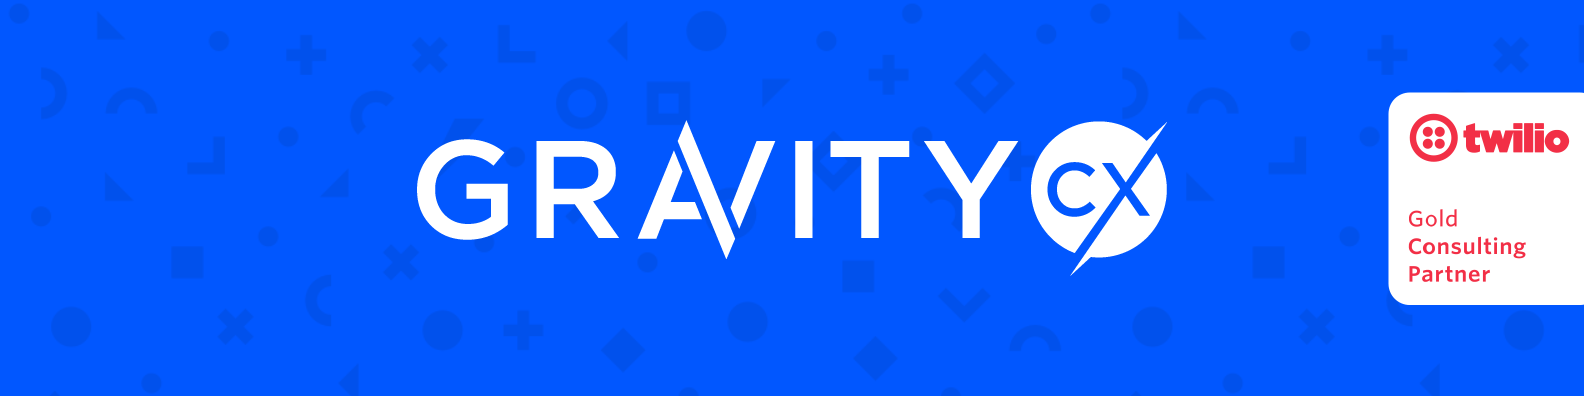 gravity-cx-linkedin-cover-image.png